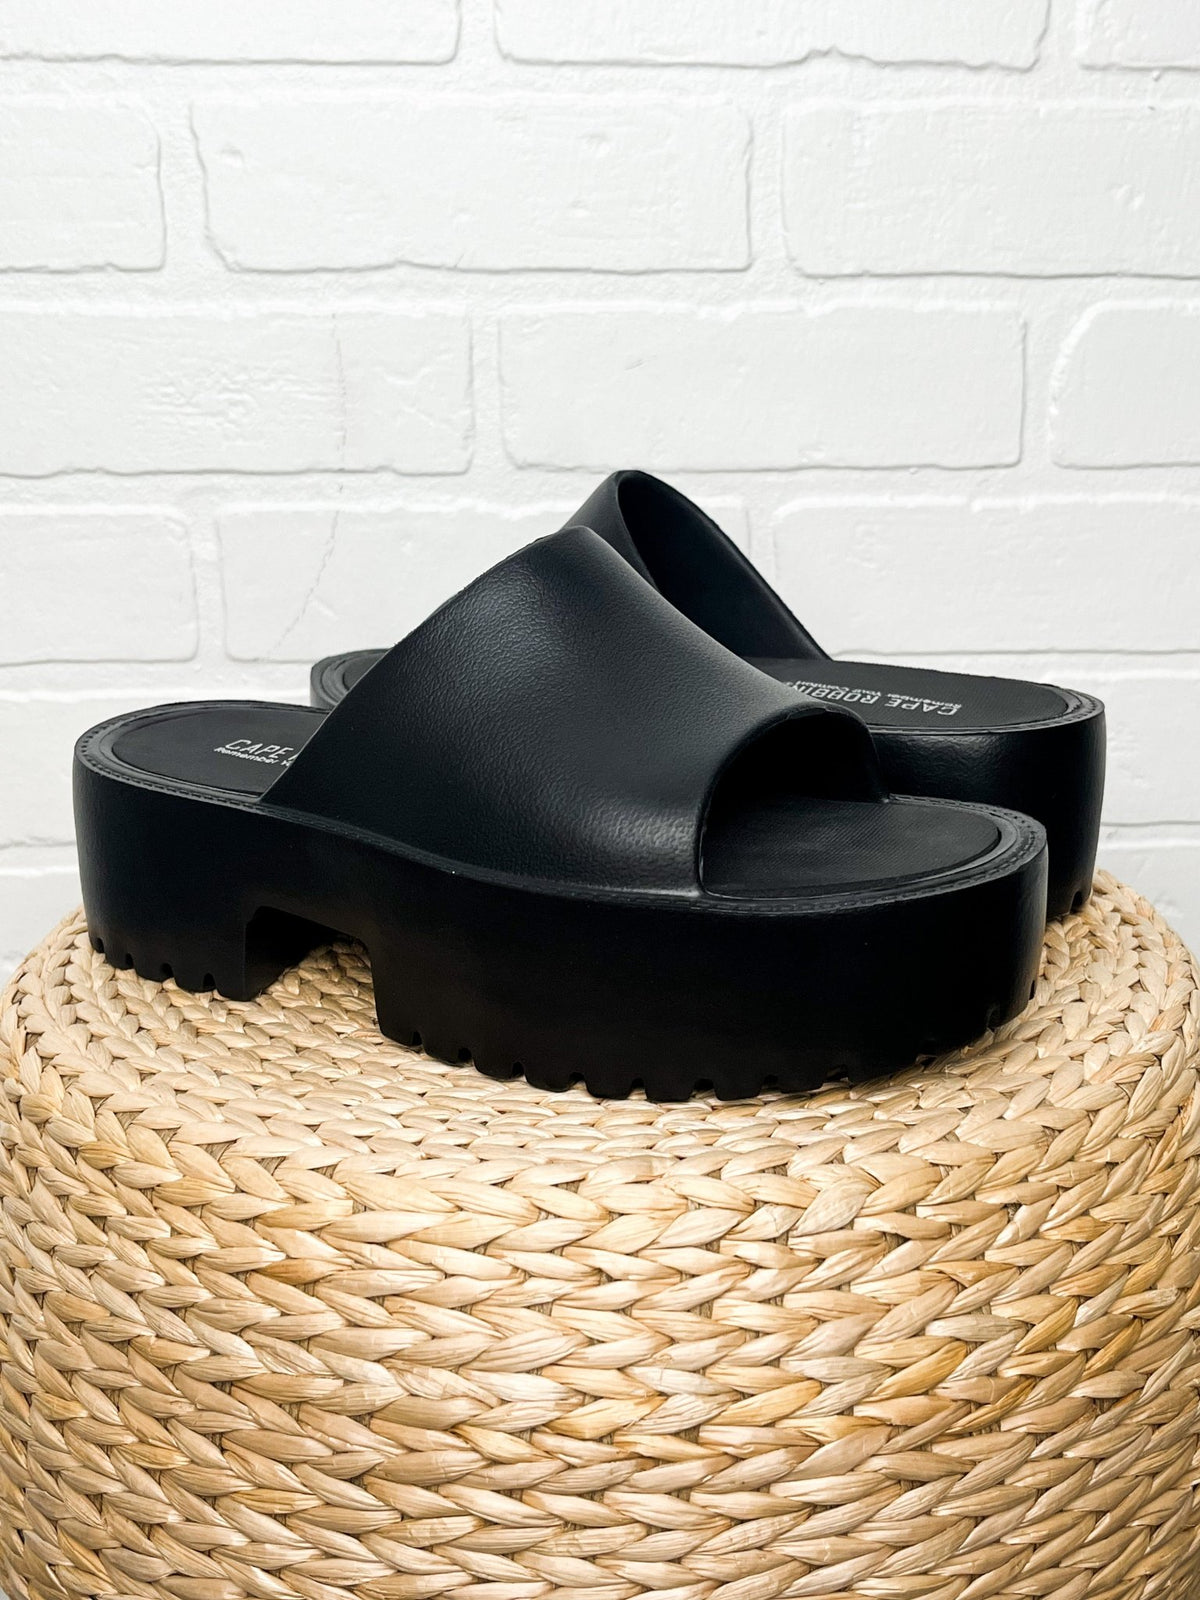 Oriya chunky sandal black - Cute shoes - Trendy Shoes at Lush Fashion Lounge Boutique in Oklahoma City